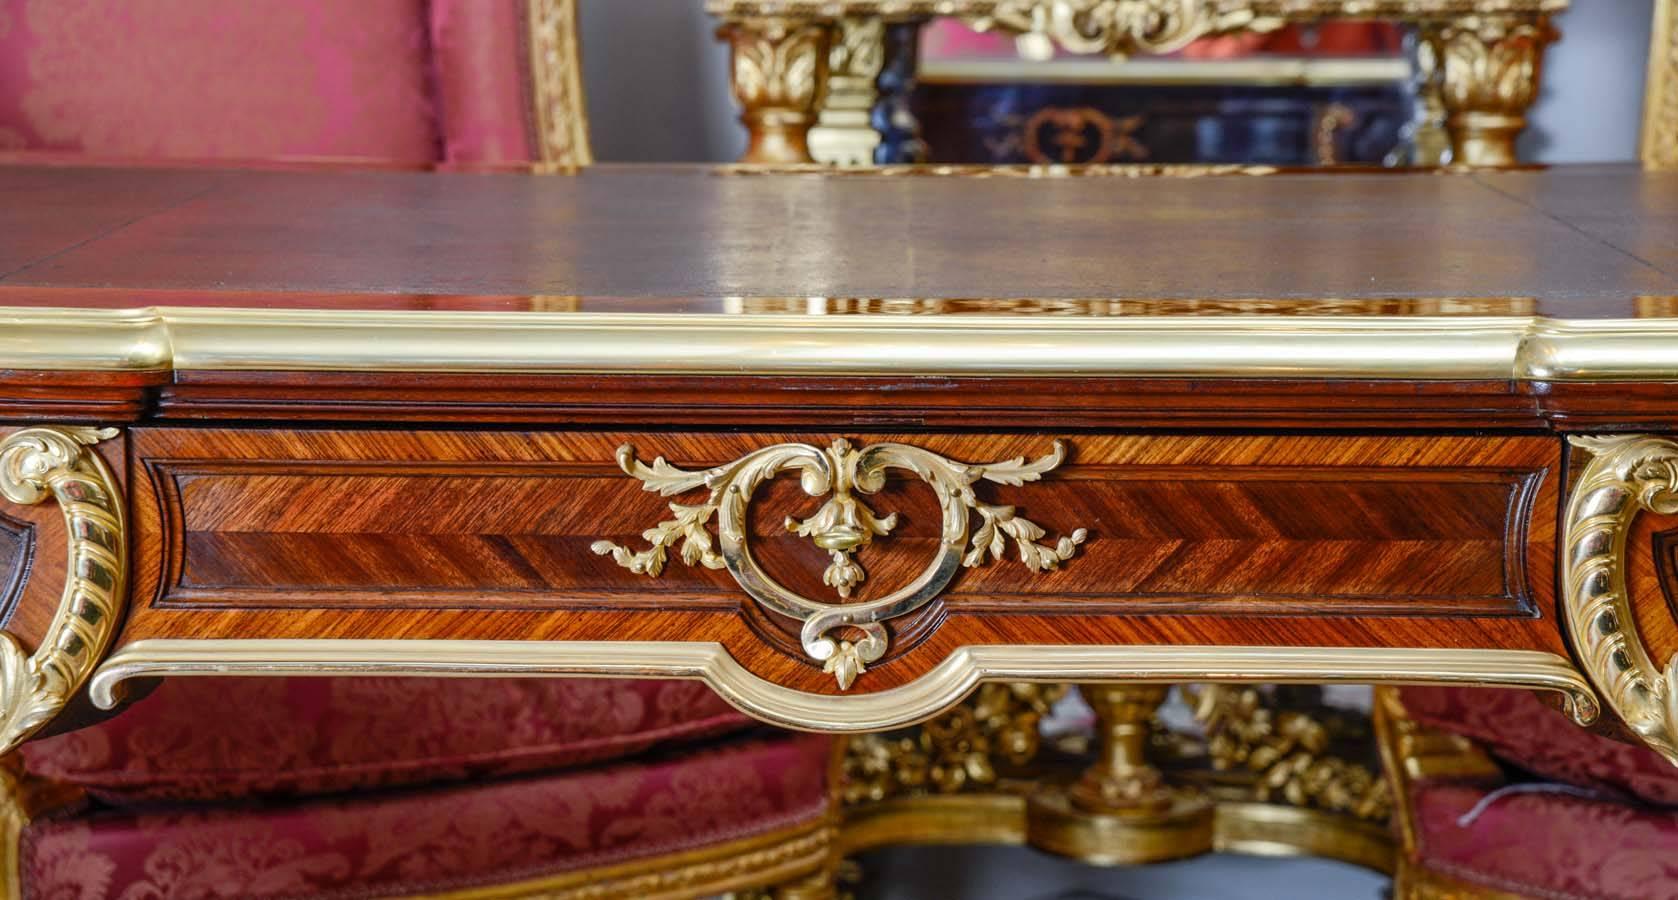 Gorgeous double face desk in rosewood, ornamented with finely chiselled gilded bronzes 
3 drawers in the belt - 
signed P Sormani 10 rue charlot Paris, on the lock.

Paul Sormani cabinet maker 1817 1877.